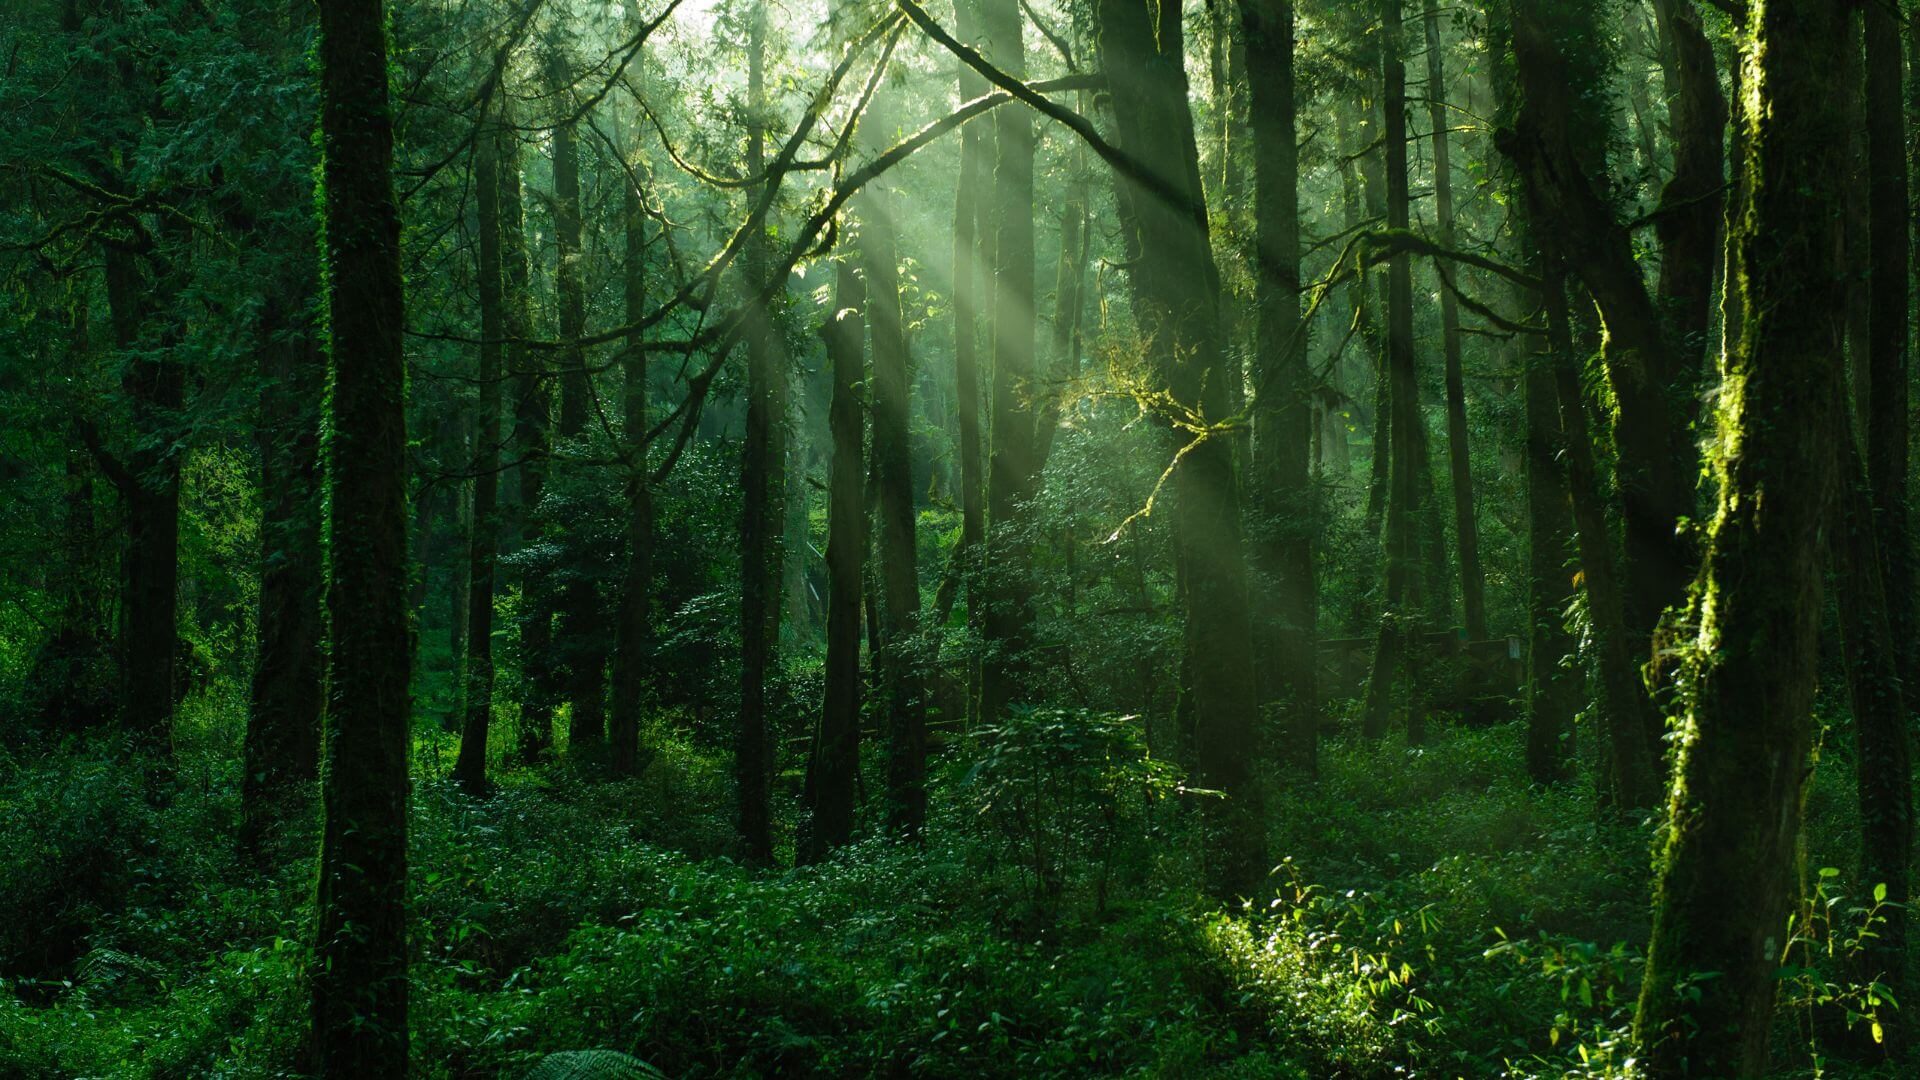 Lush green forest of trees with sun shining through the openings.